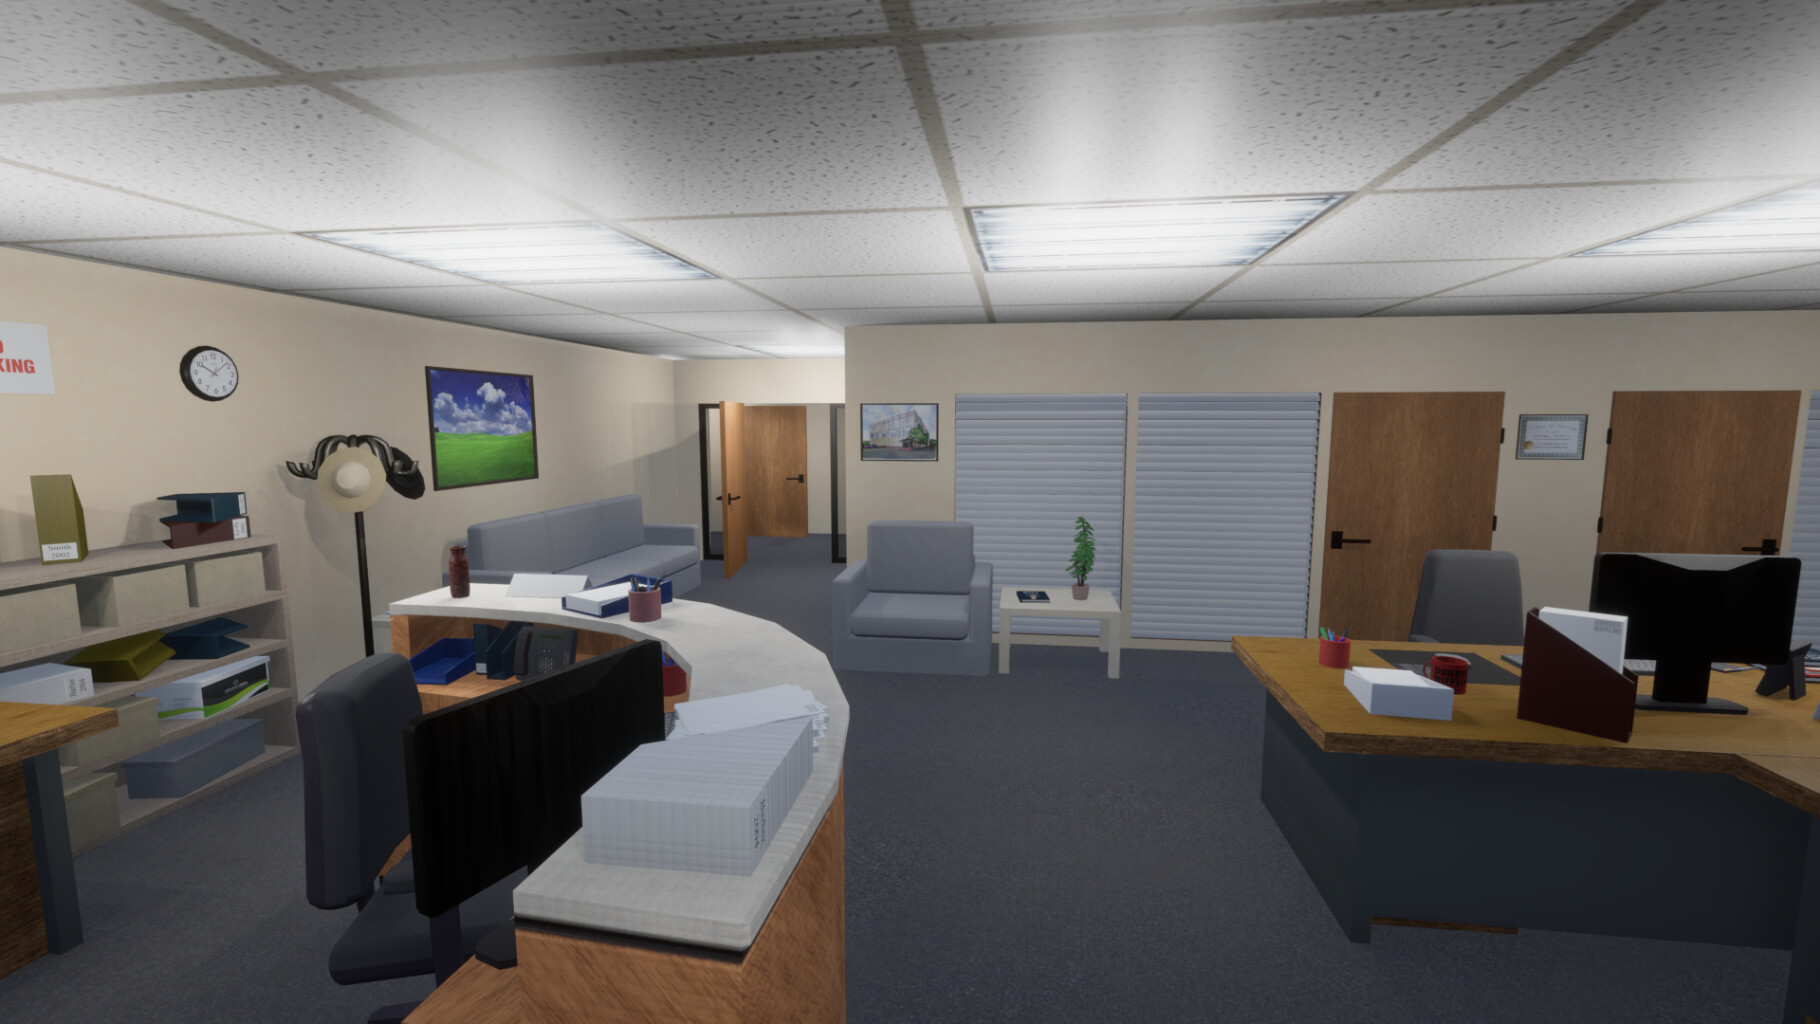 Someone recreated The Office's Dunder Mifflin in explorable 3D and I love  it